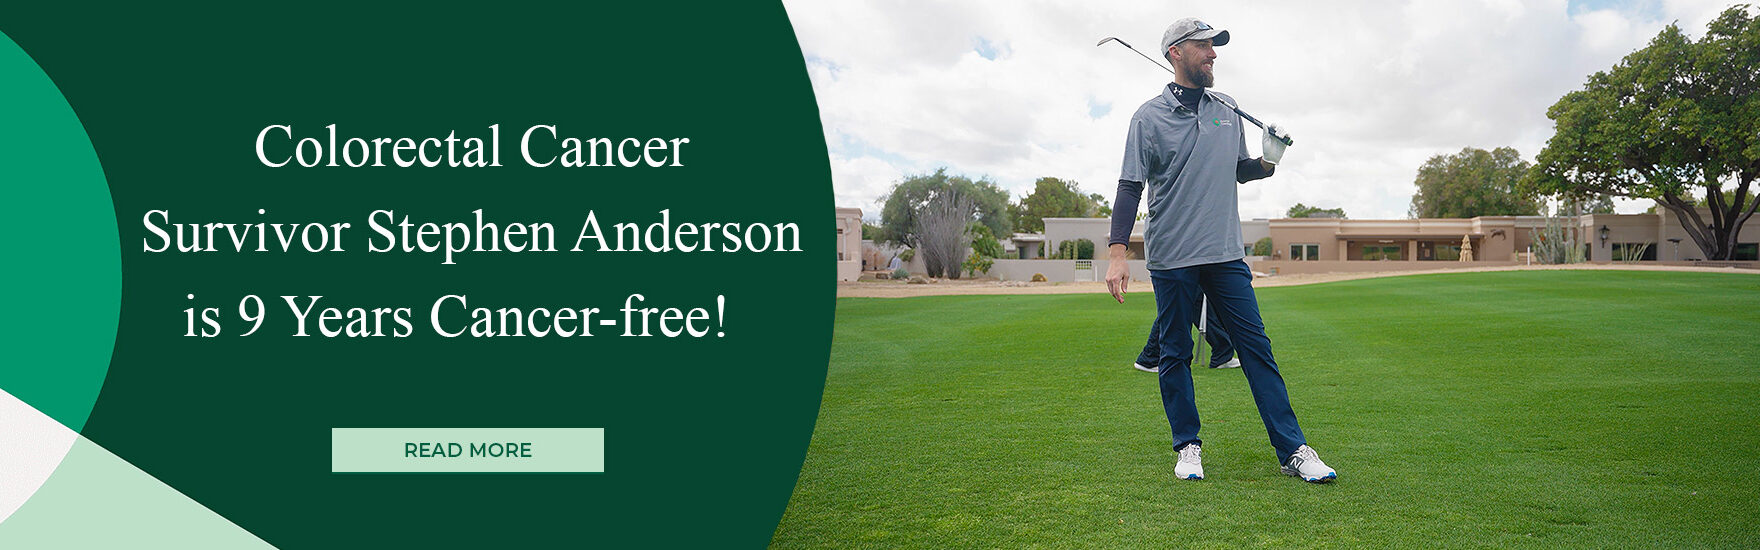 Colorectal Cancer Survivor Stephen Anderson is 9 Years Cancer-free!